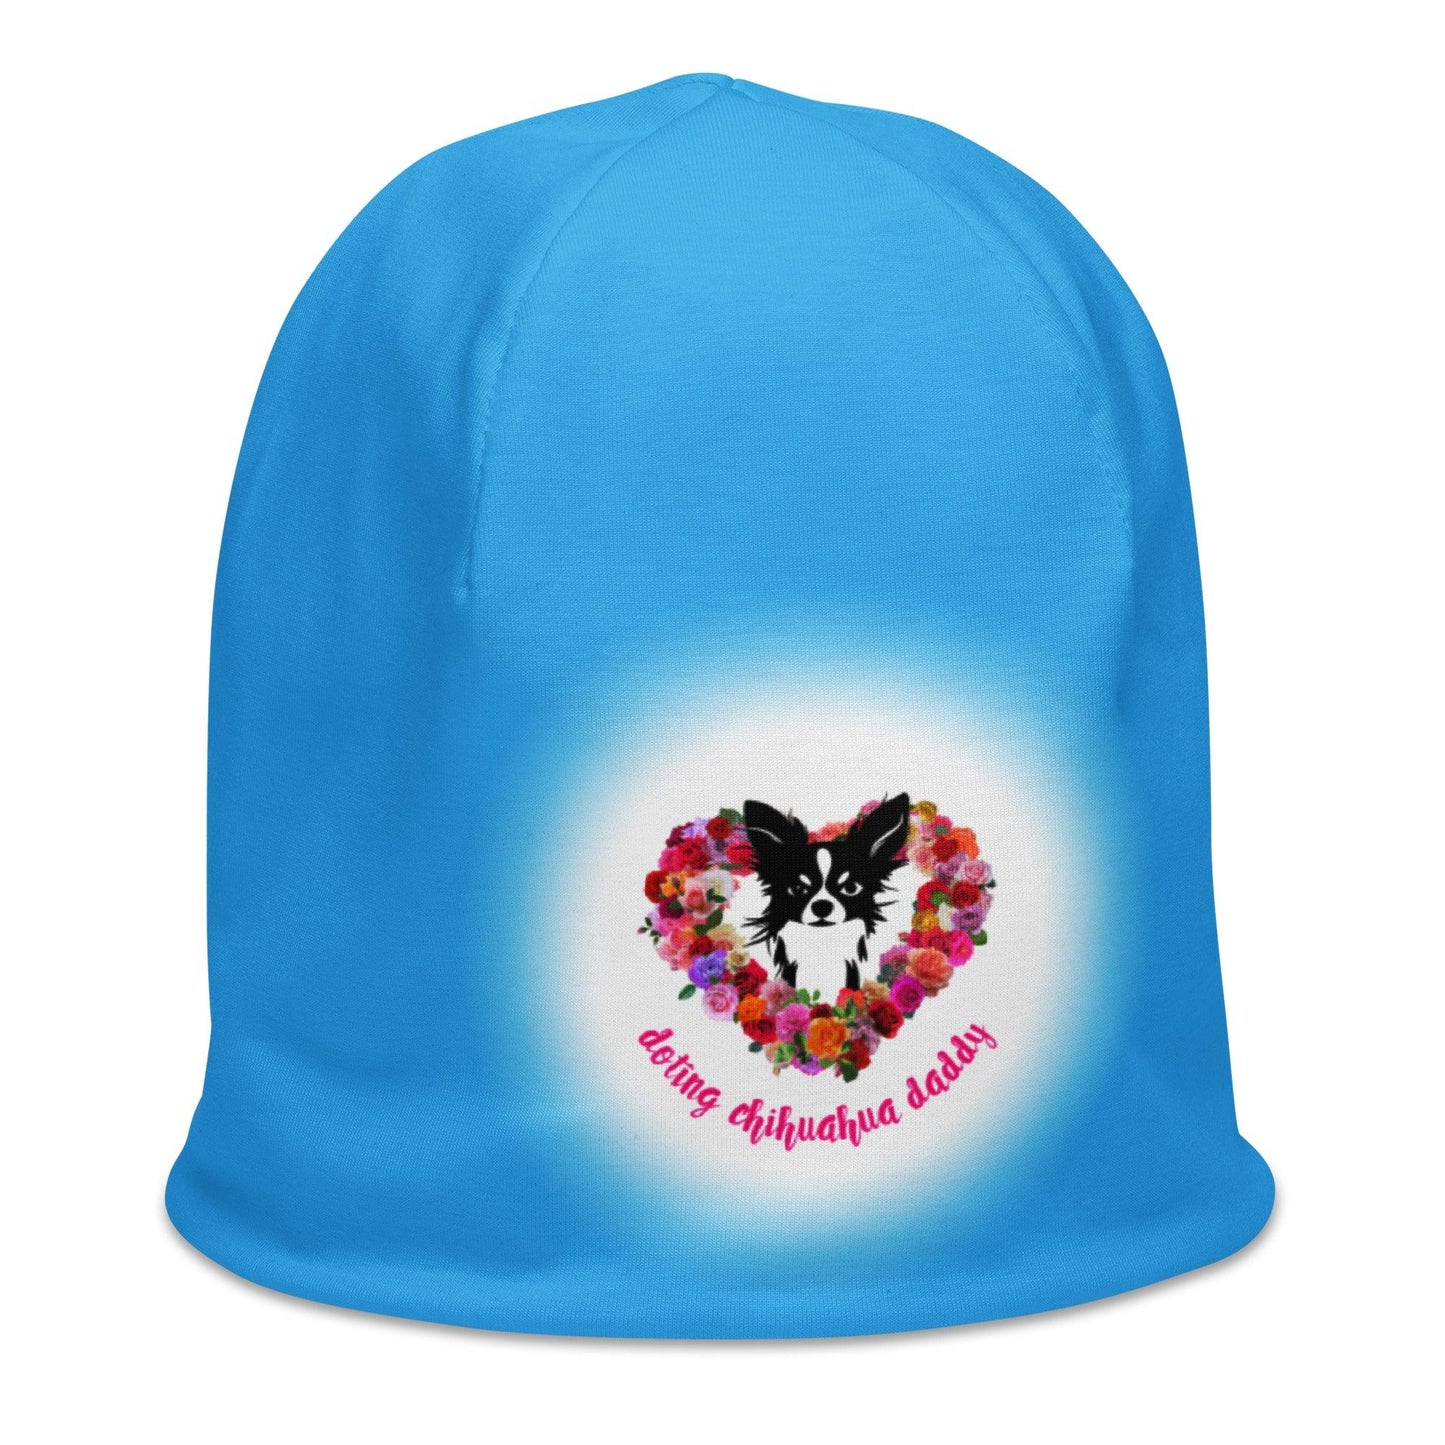 Real men love chihuahuas. Chihuahua daddies are sexy! Forget guns and roses; Chimigos gives you a chihuahua and roses. Divine. Adorable. Slay. SEXY! This soft and comfy chihuahua and roses love heart sky blue beanie makes the perfect Father's Day / birthday / Christmas gift for a doting chihuahua daddy. Renate Kriegler for Chimigos.